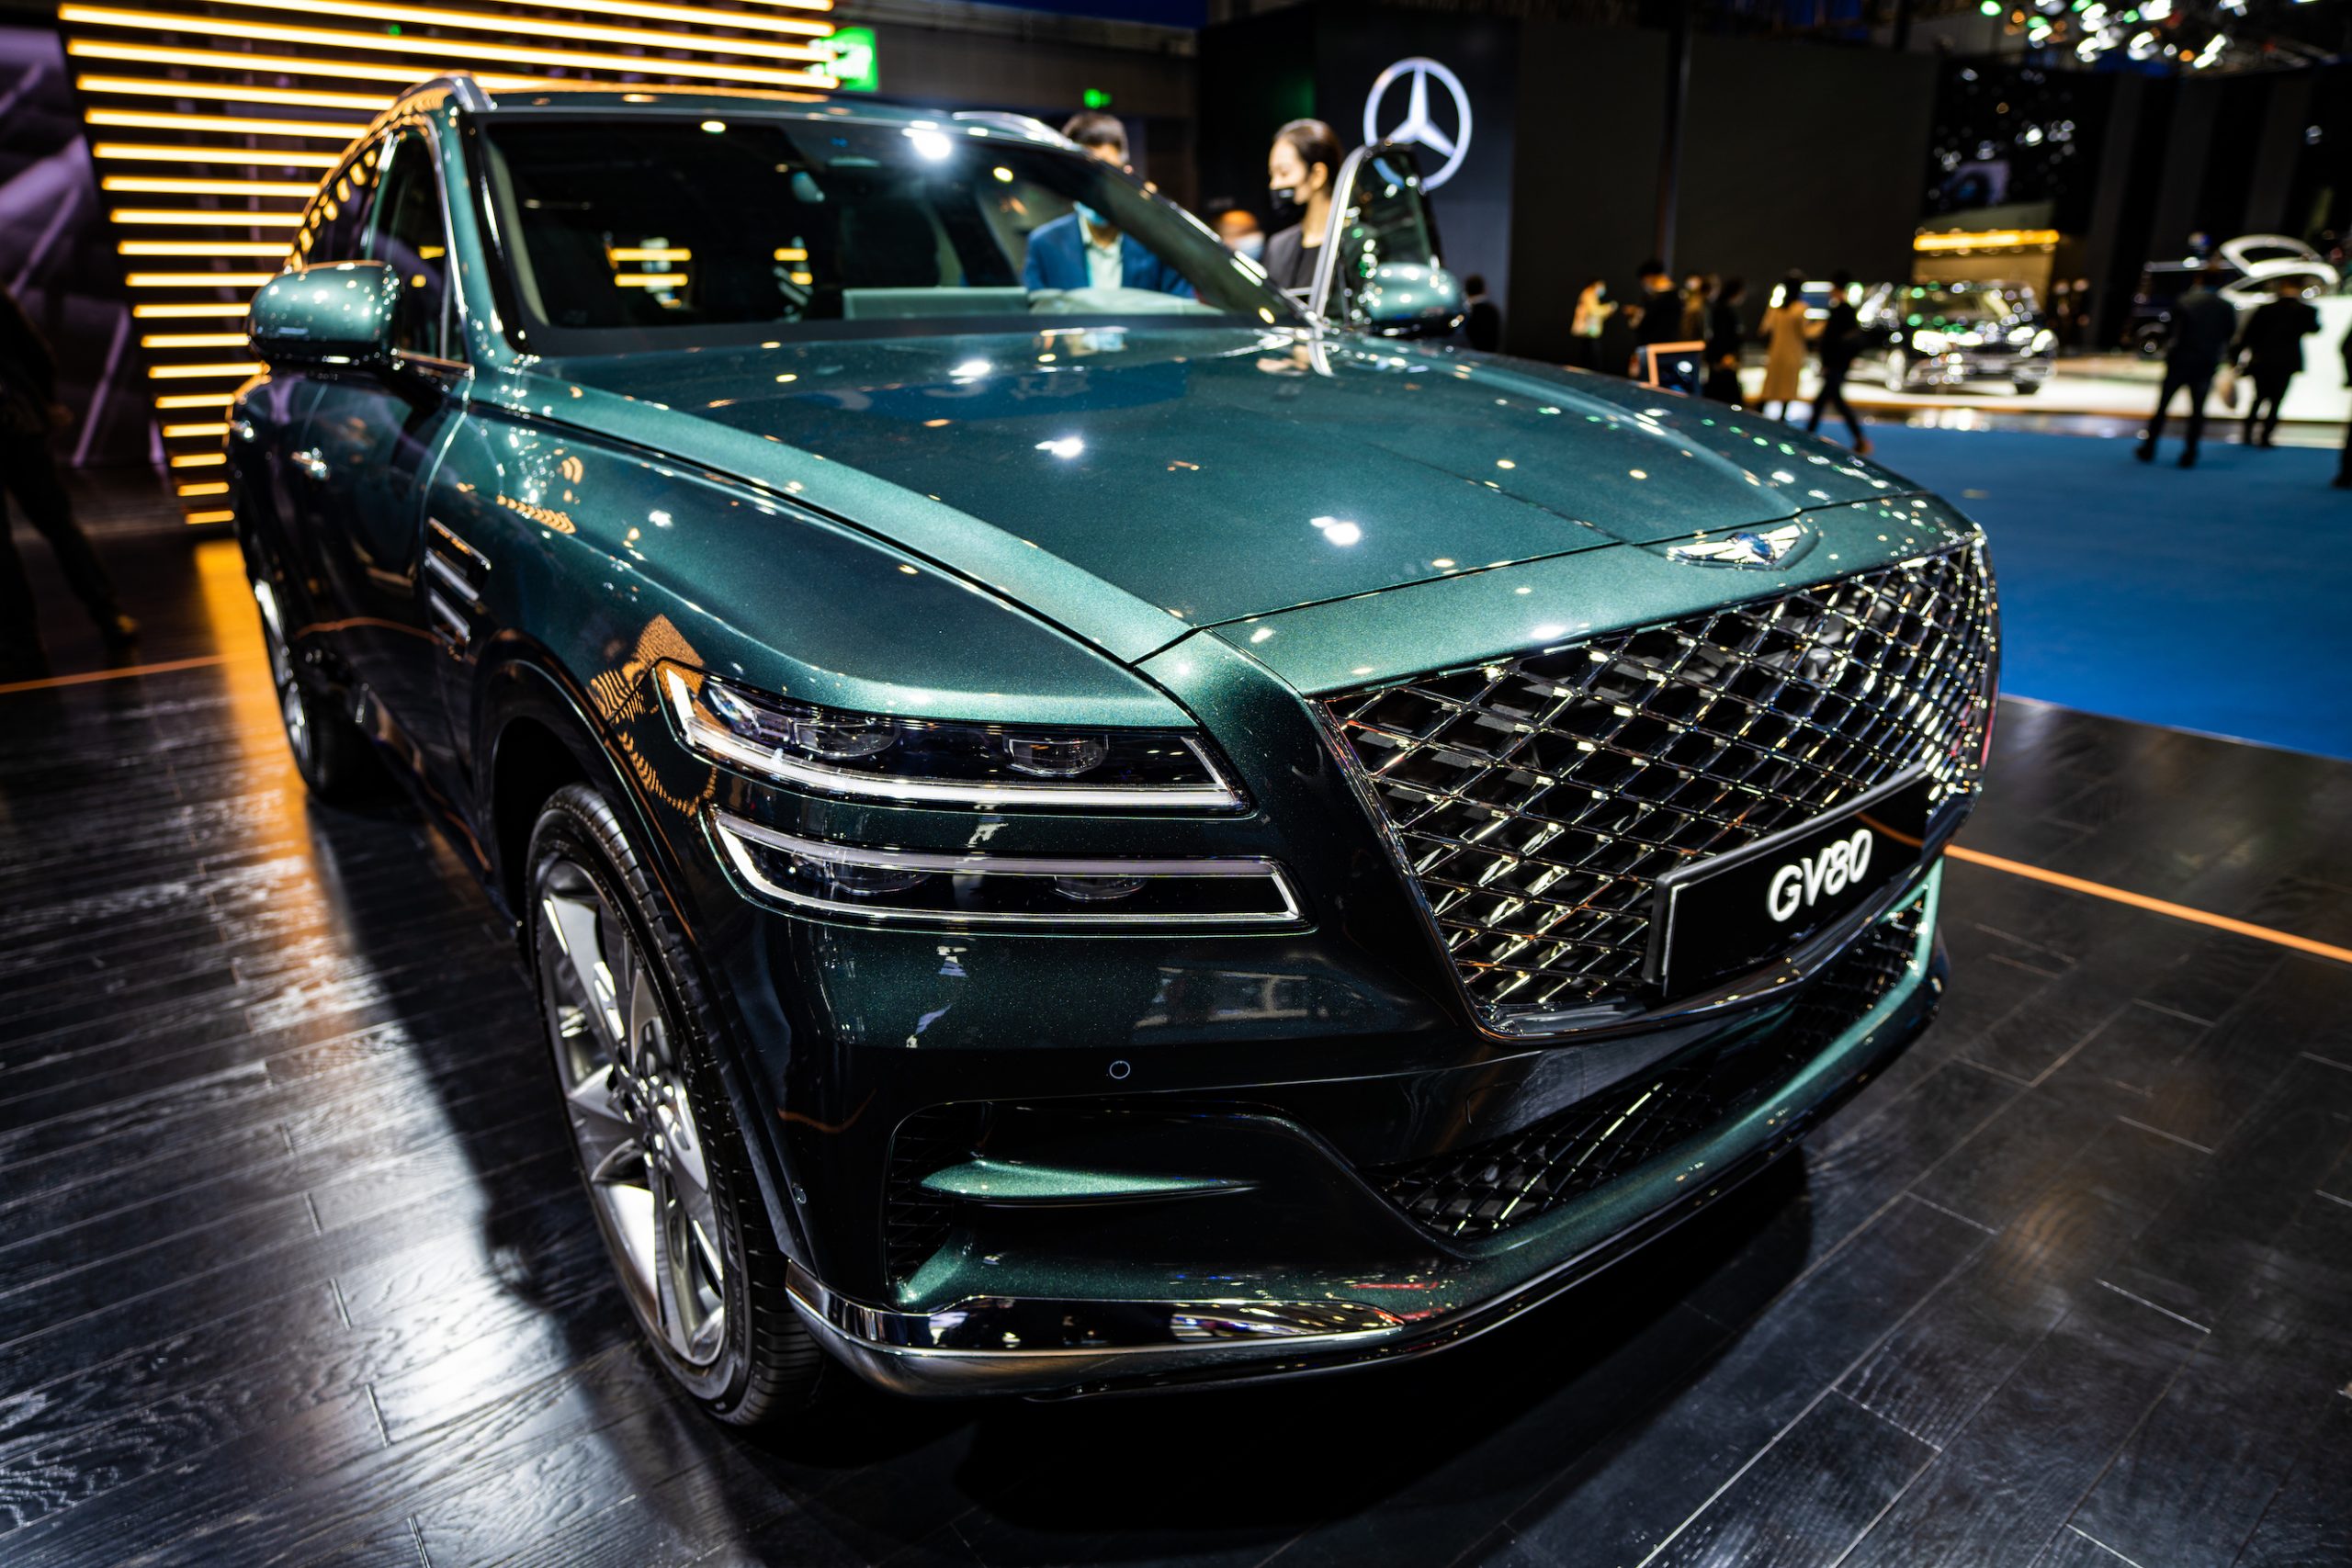 A Hyundai Genesis GV80 SUV is on display during the 3rd China International Import Expo (CIIE) at the National Exhibition and Convention Center